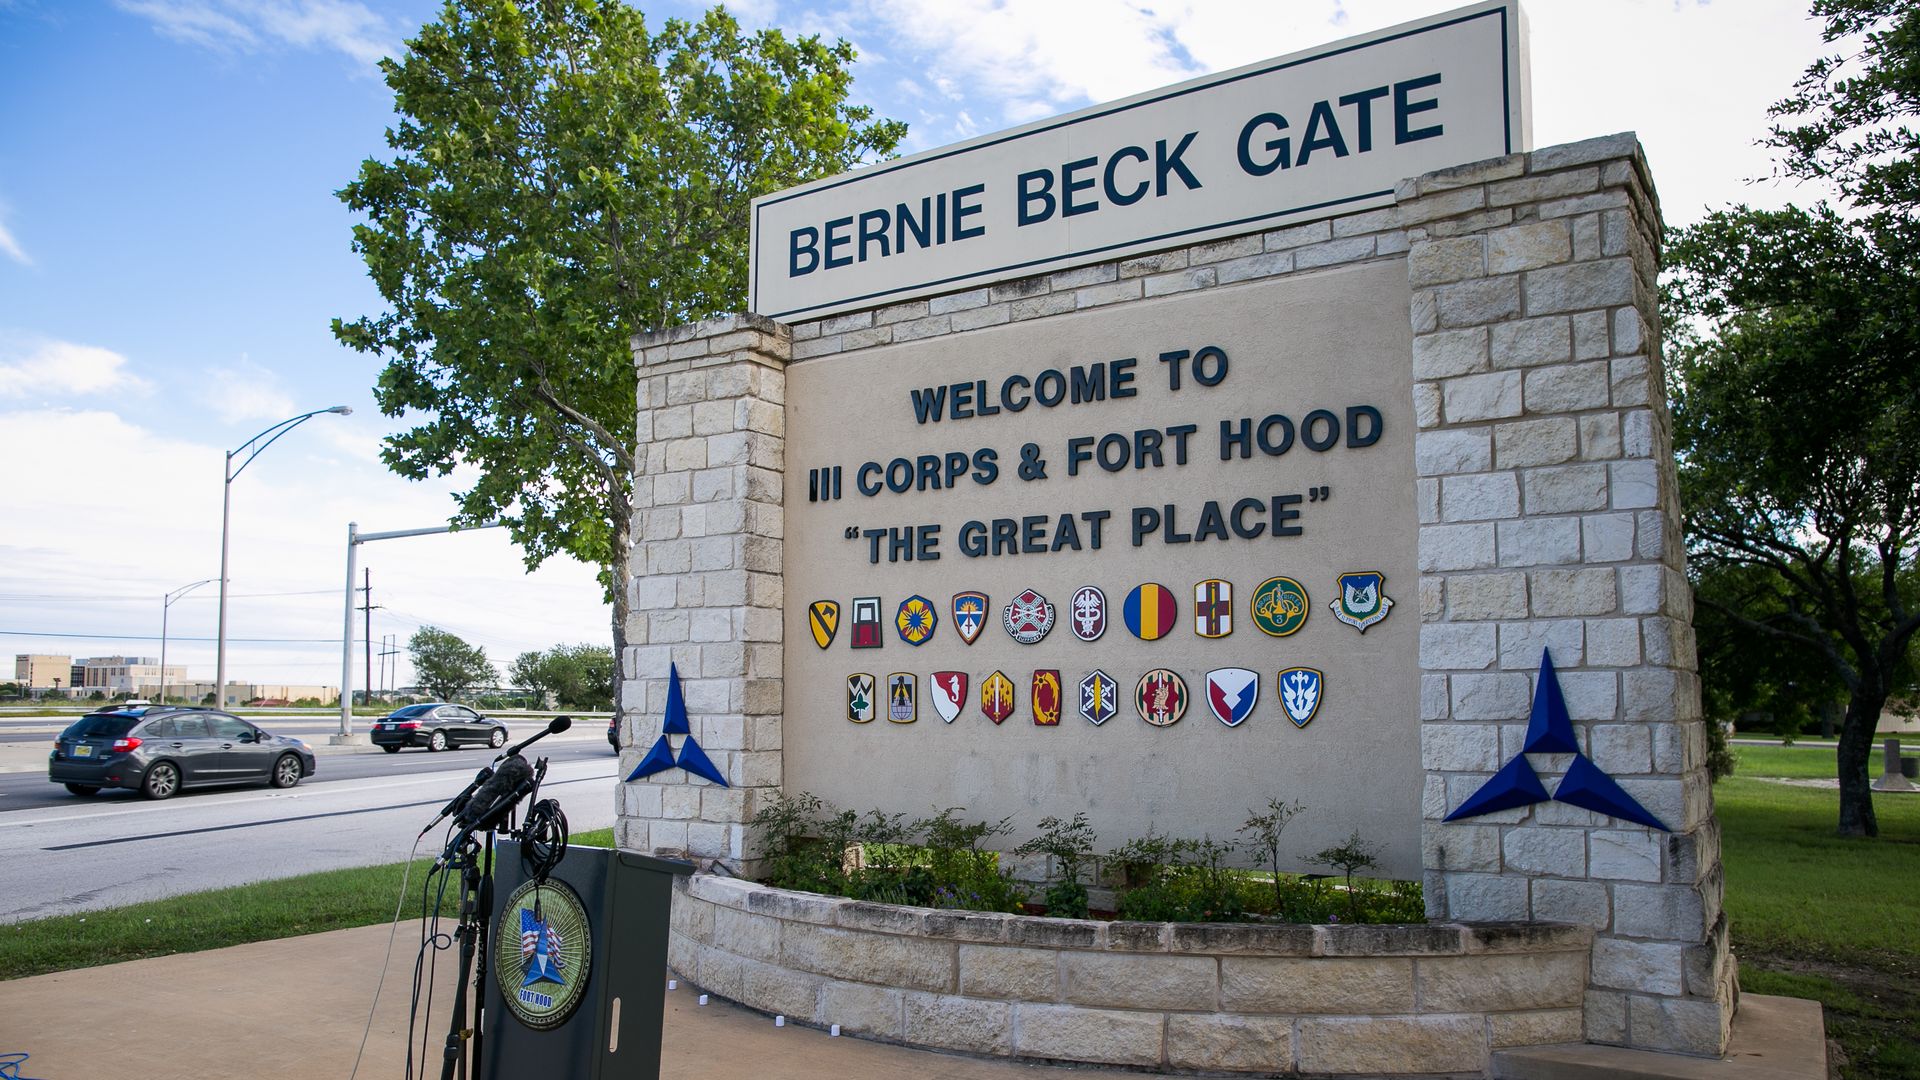 Media outlets gather outside the Bernie Beck gate at Fort Hood